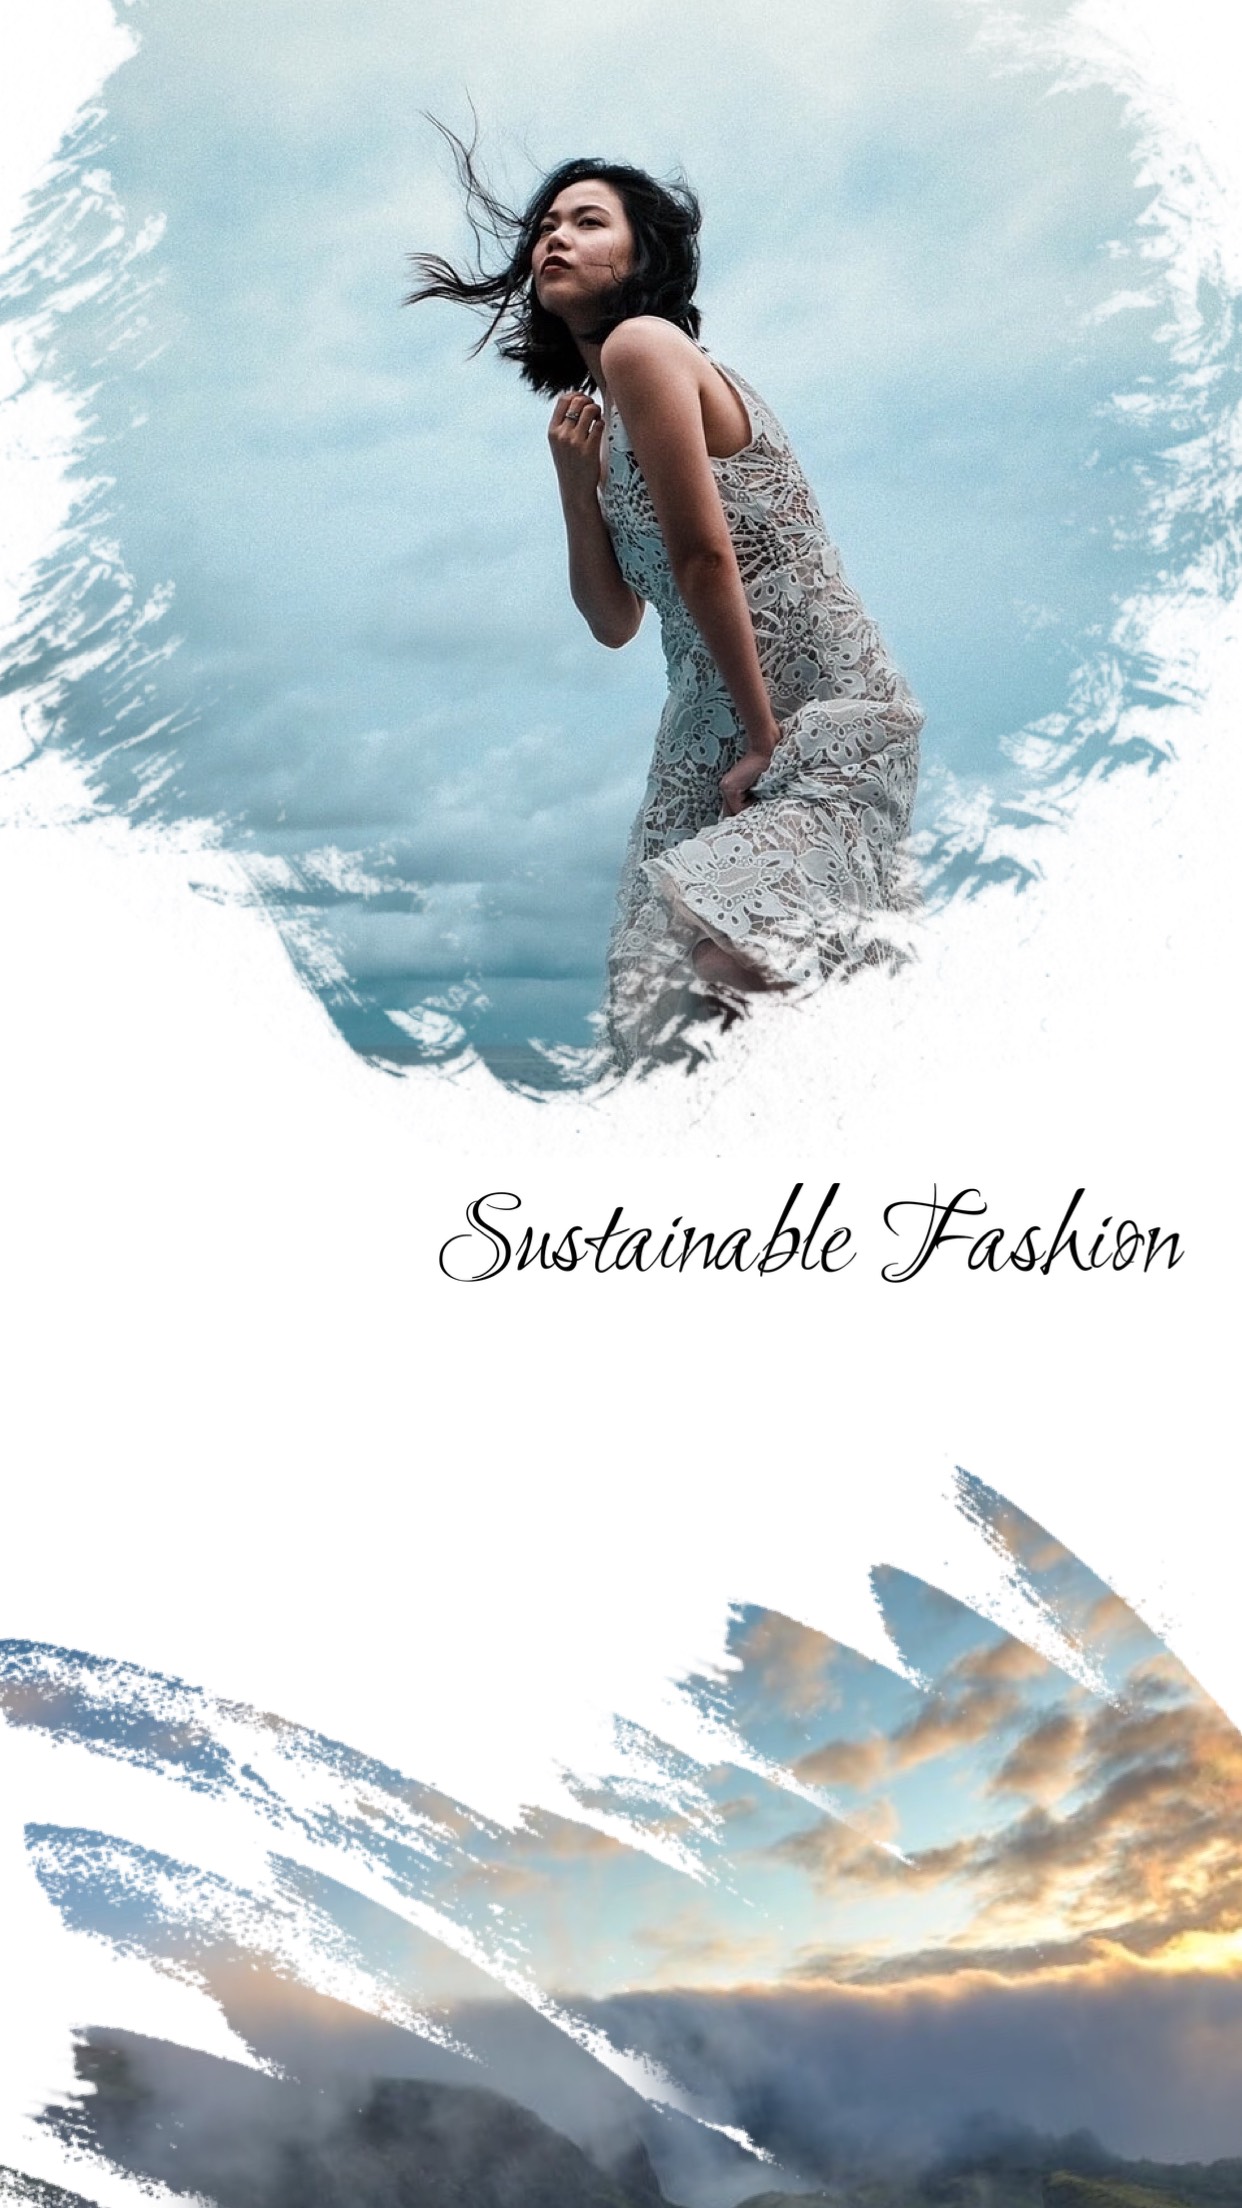 Woman modeling sustainable fashion Classy template